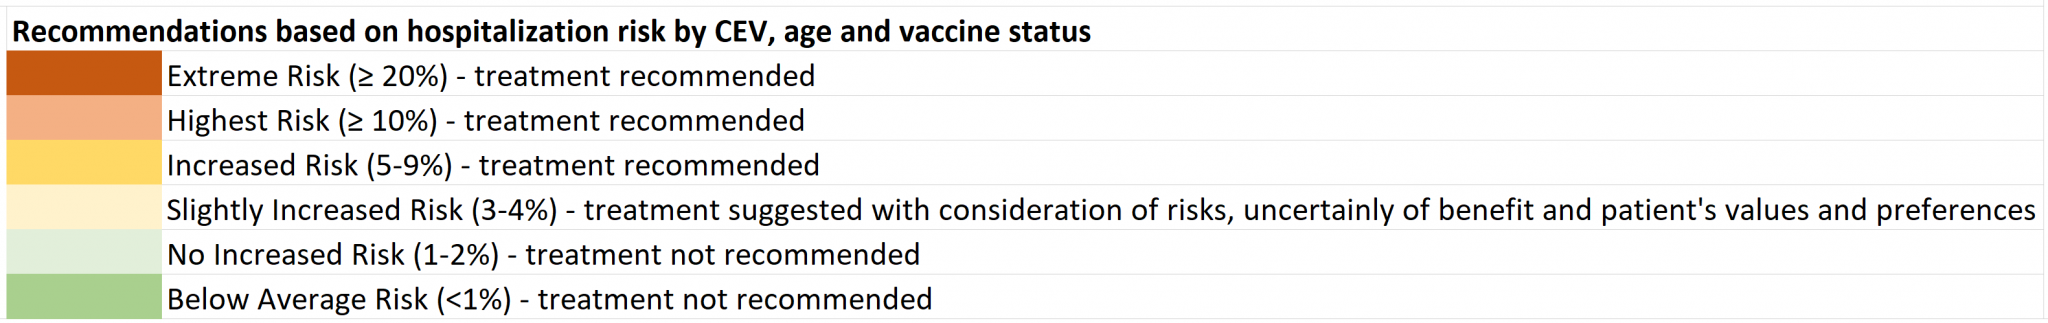 Recommendations based on hospitalization risk by CEV, age and vaccine status 